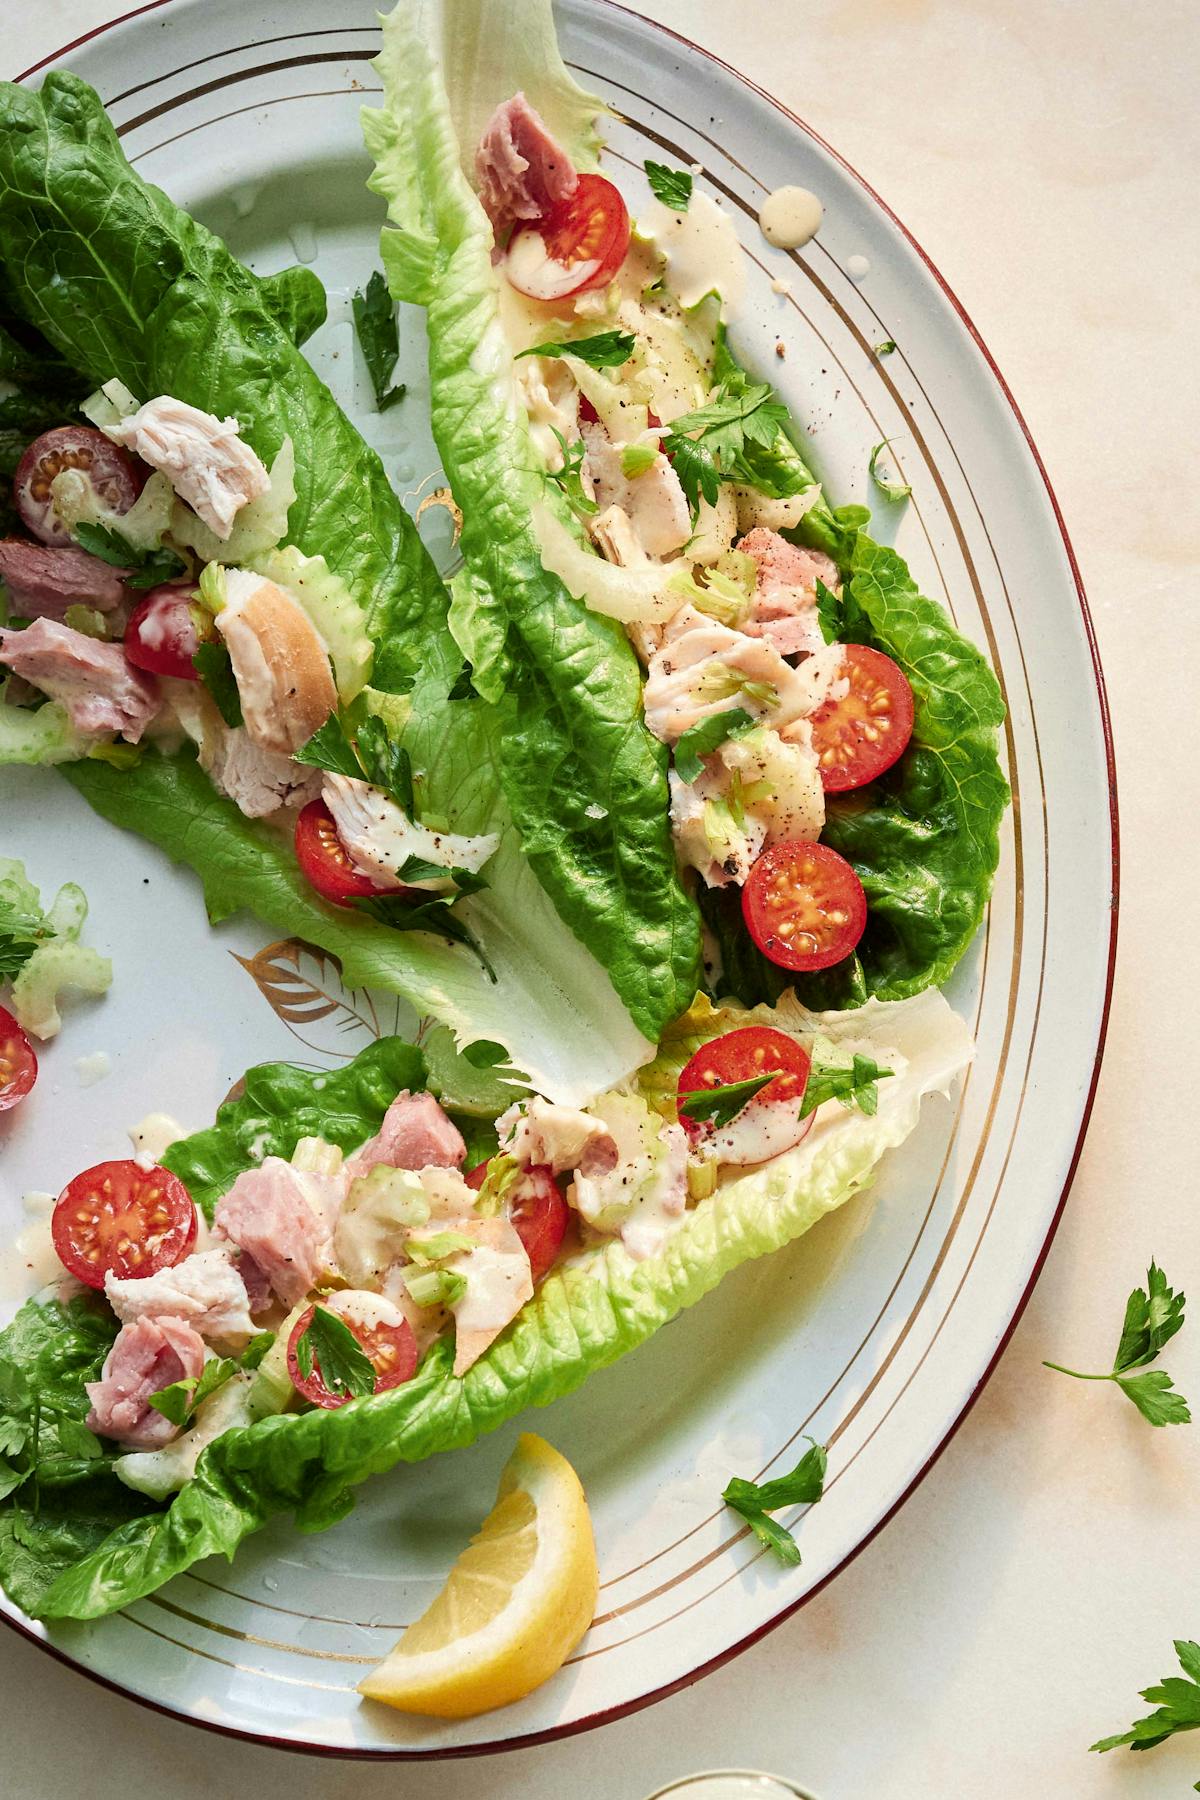 Lettuce cups with deli turkey, tomatoes and mayo